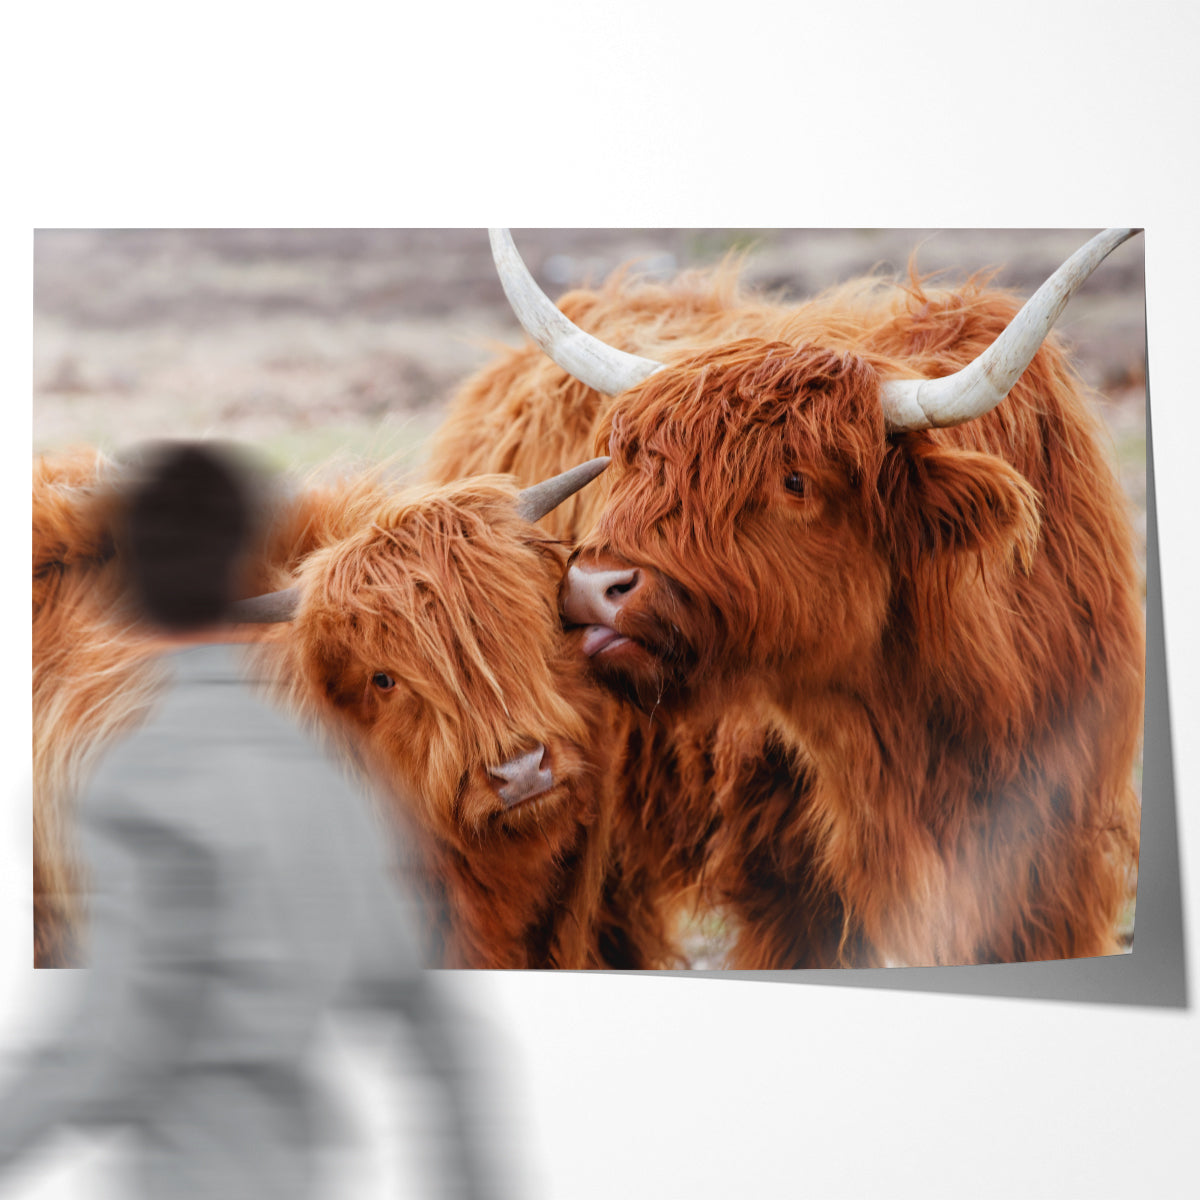 Highland Сow Сattle Family Poster Prints Wall Art-Horizontal Posters NOT FRAMED-CetArt-10″x8″ inches-CetArt